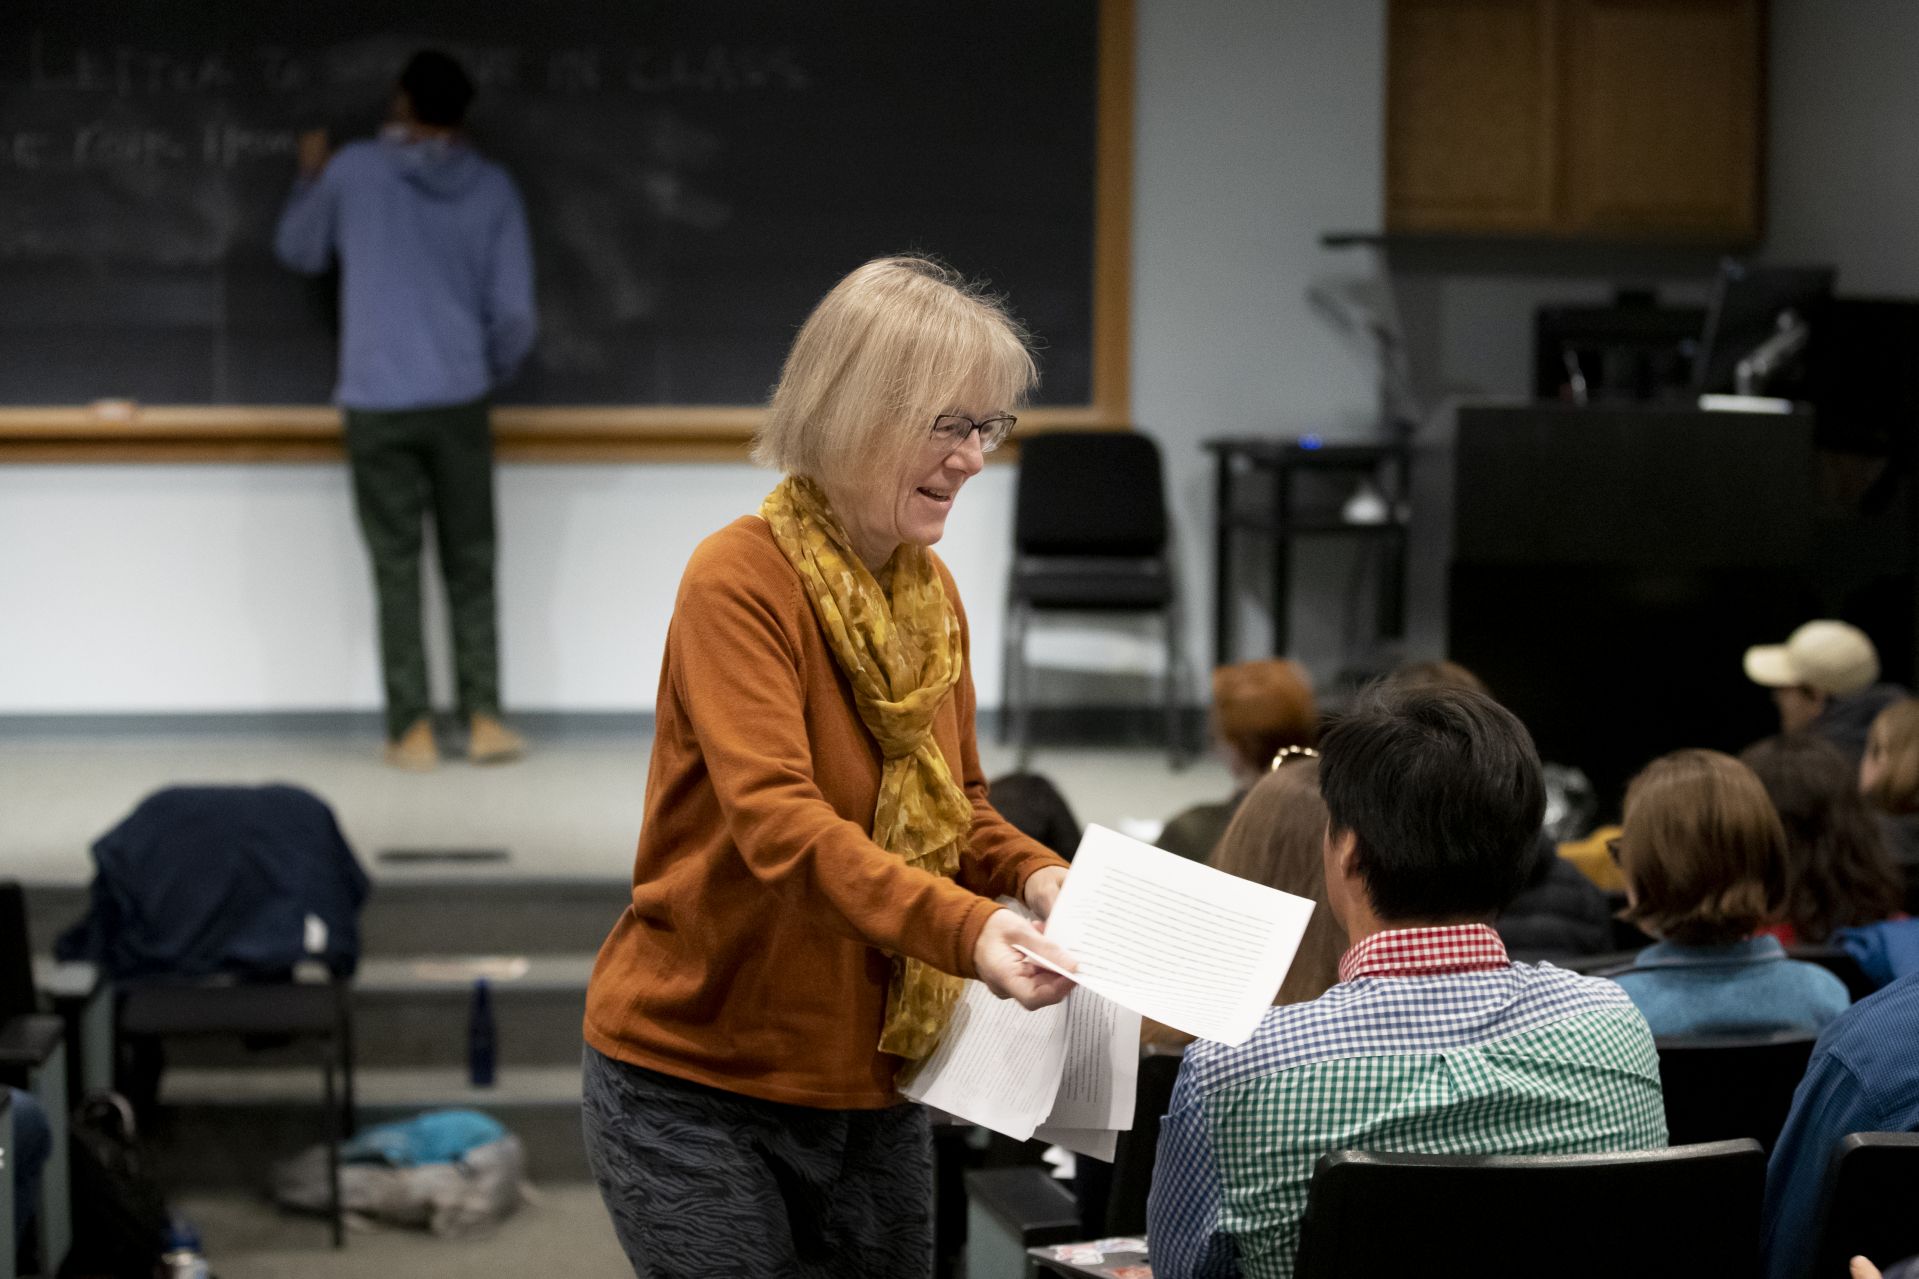 As the 2019 Otis Lecturer Ross Gay puts a writing prompt on the blackboard, Costlow hands back papers to her students. (Phyllis Graber Jensen/Bates College)